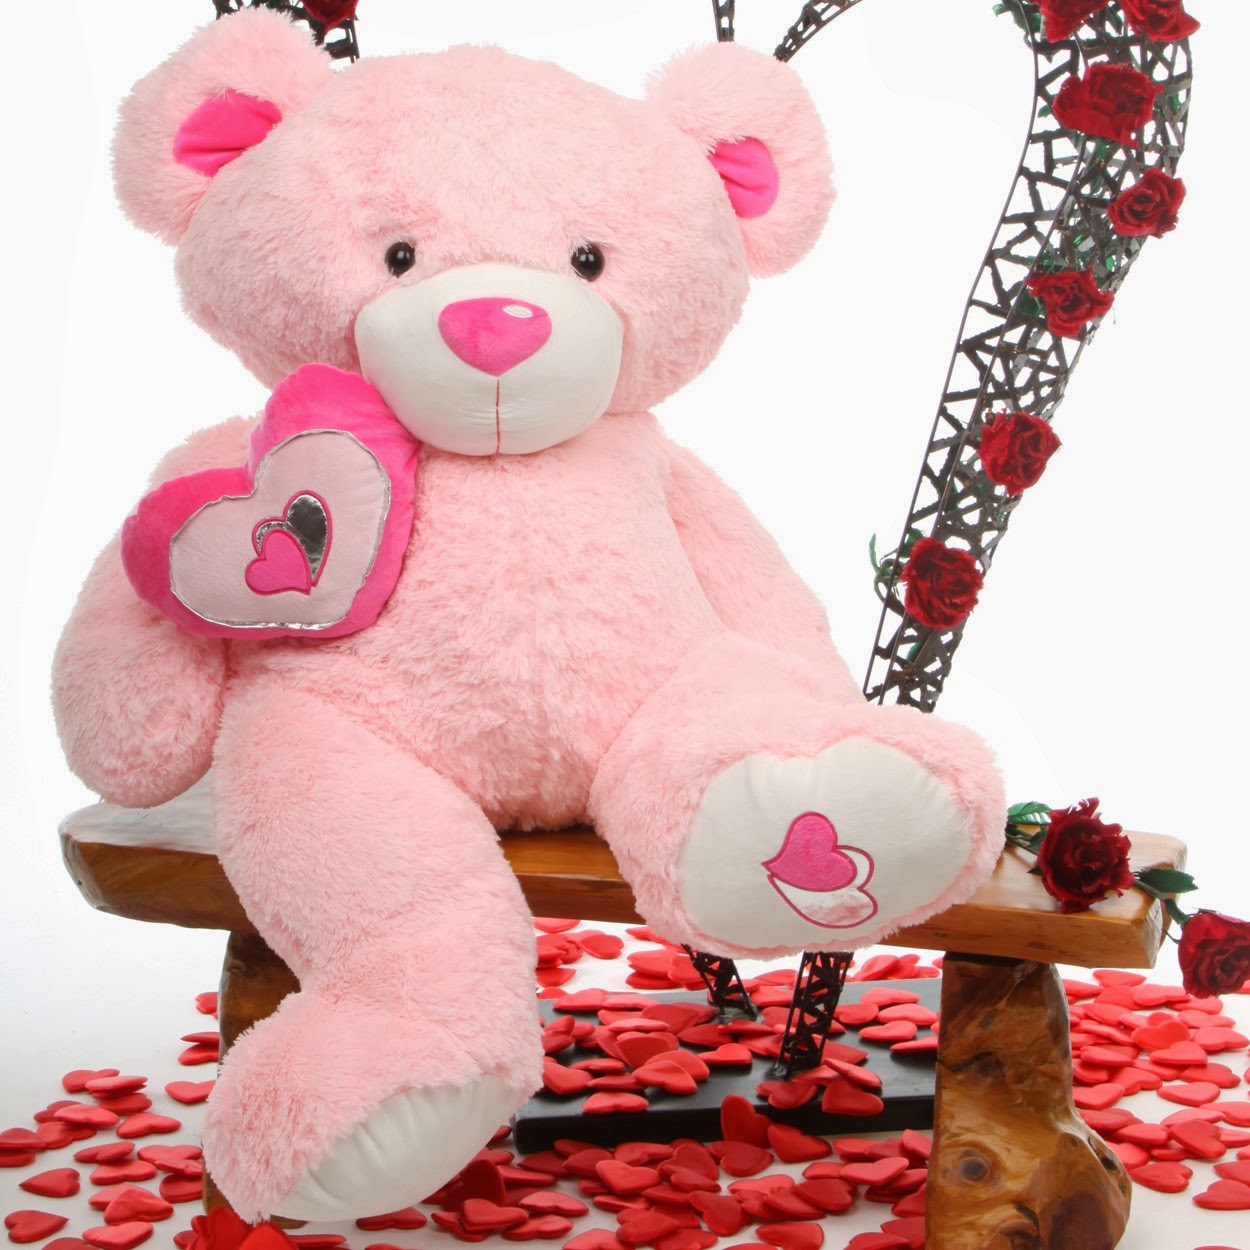 Free Download Every Lovely Wallpapers Pink Teddy Bear Hd Wallpapers 1250x1250 For Your Desktop Mobile Tablet Explore 45 Pink Teddy Bear Wallpaper Love Teddy Bear Wallpapers Most Beautiful Teddy